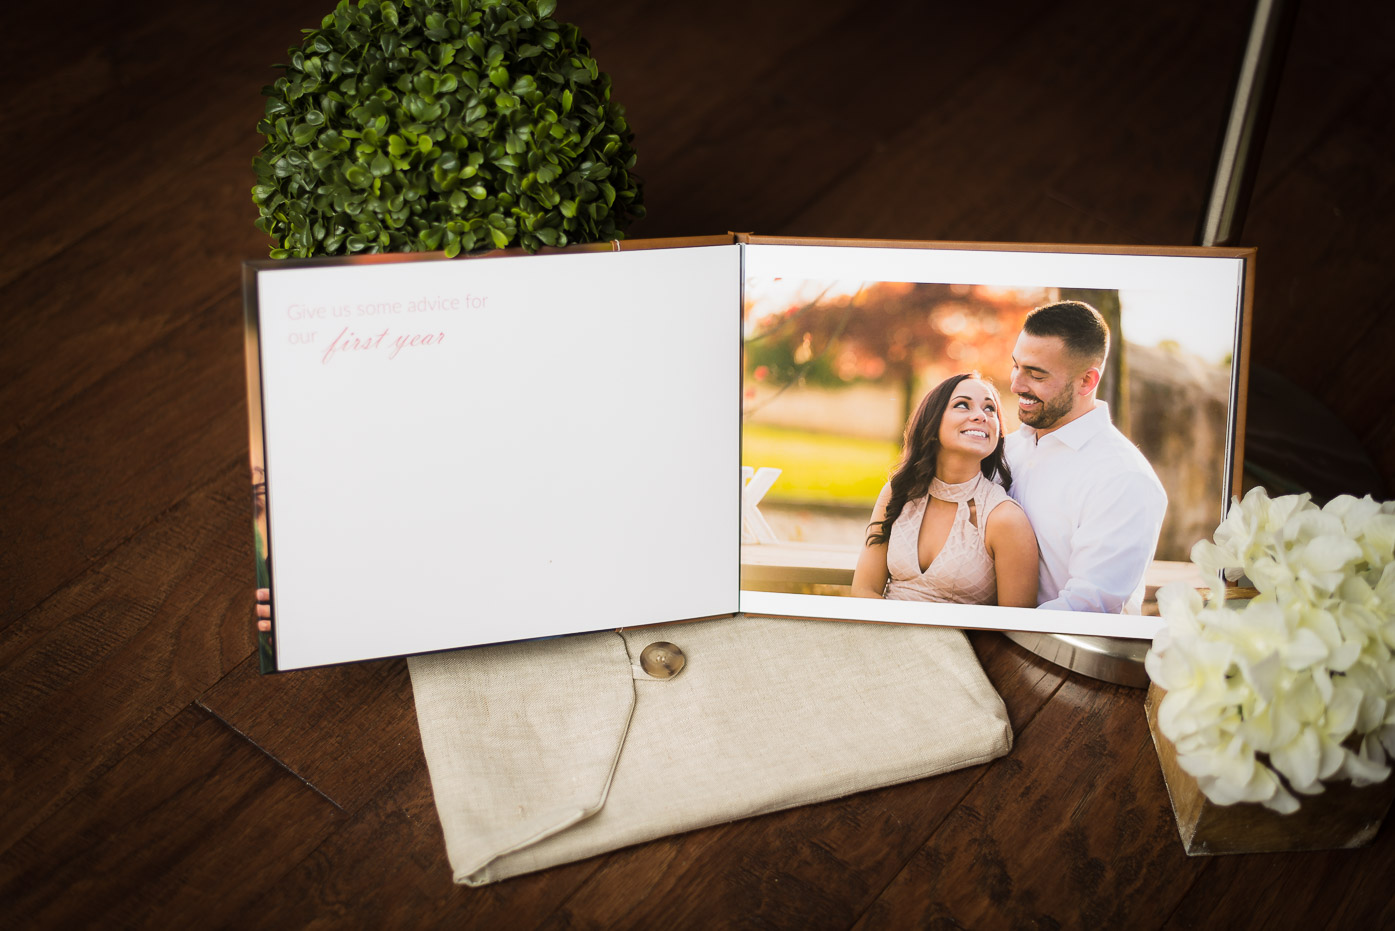 Guest Sign In Album with Engagement Photos